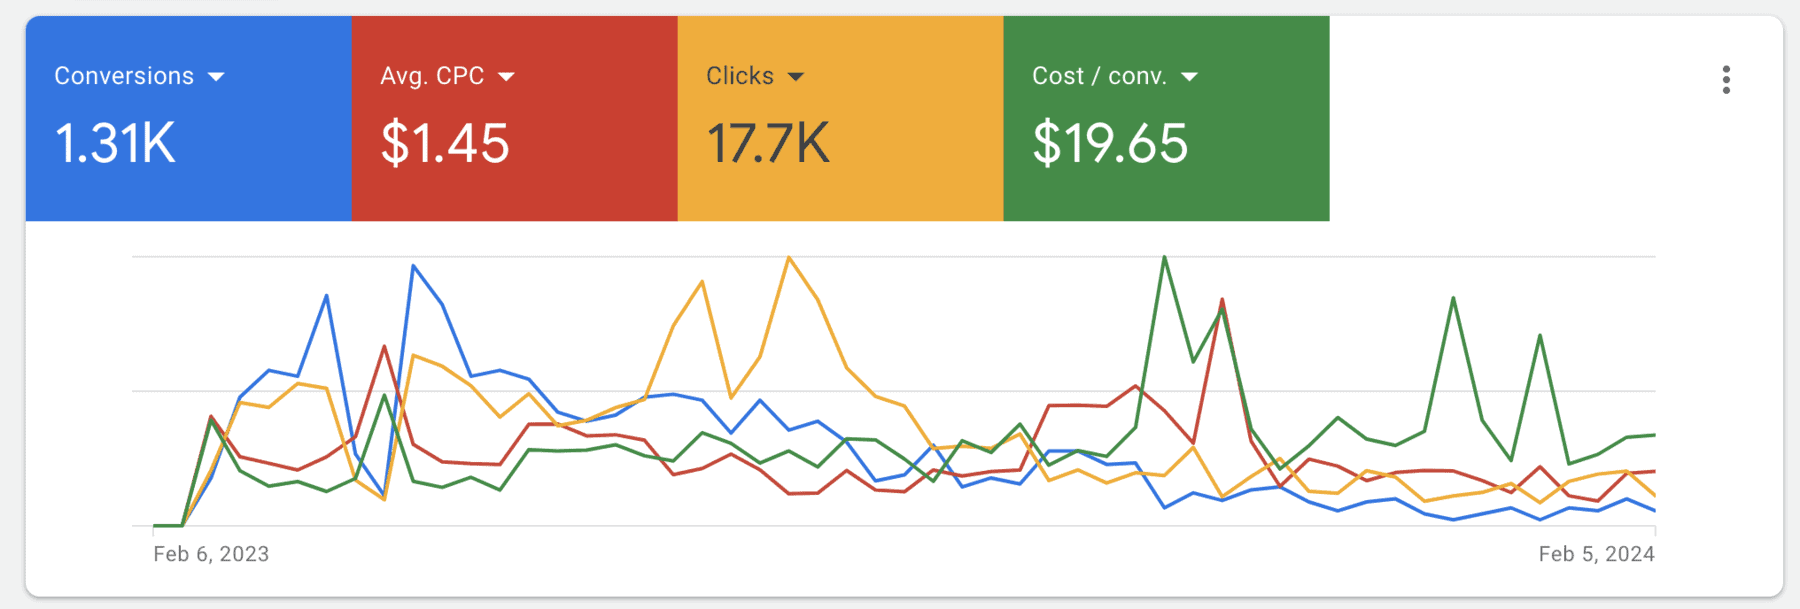 Google Ads Lots Of Conversions